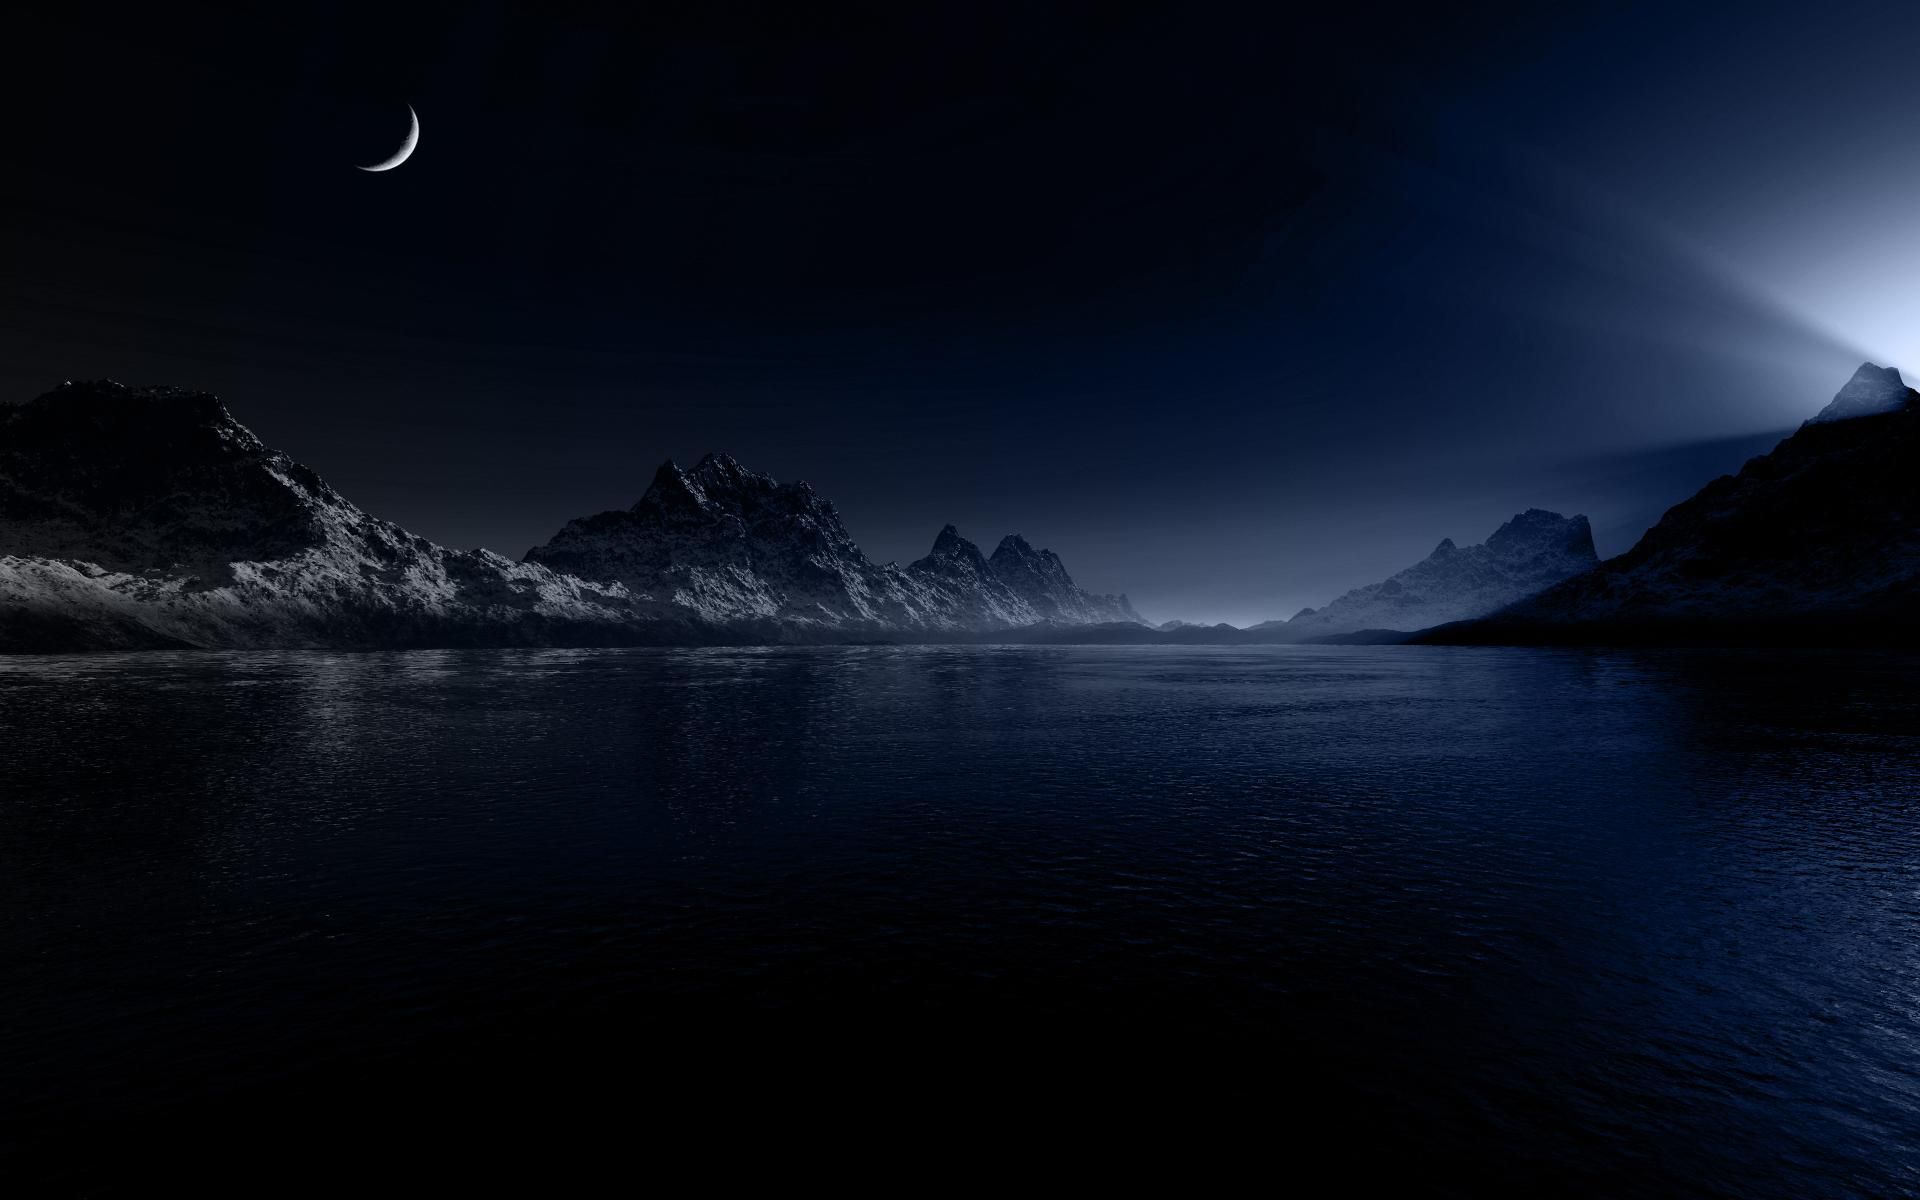 Missing The Moon HD Wallpaper, get it now